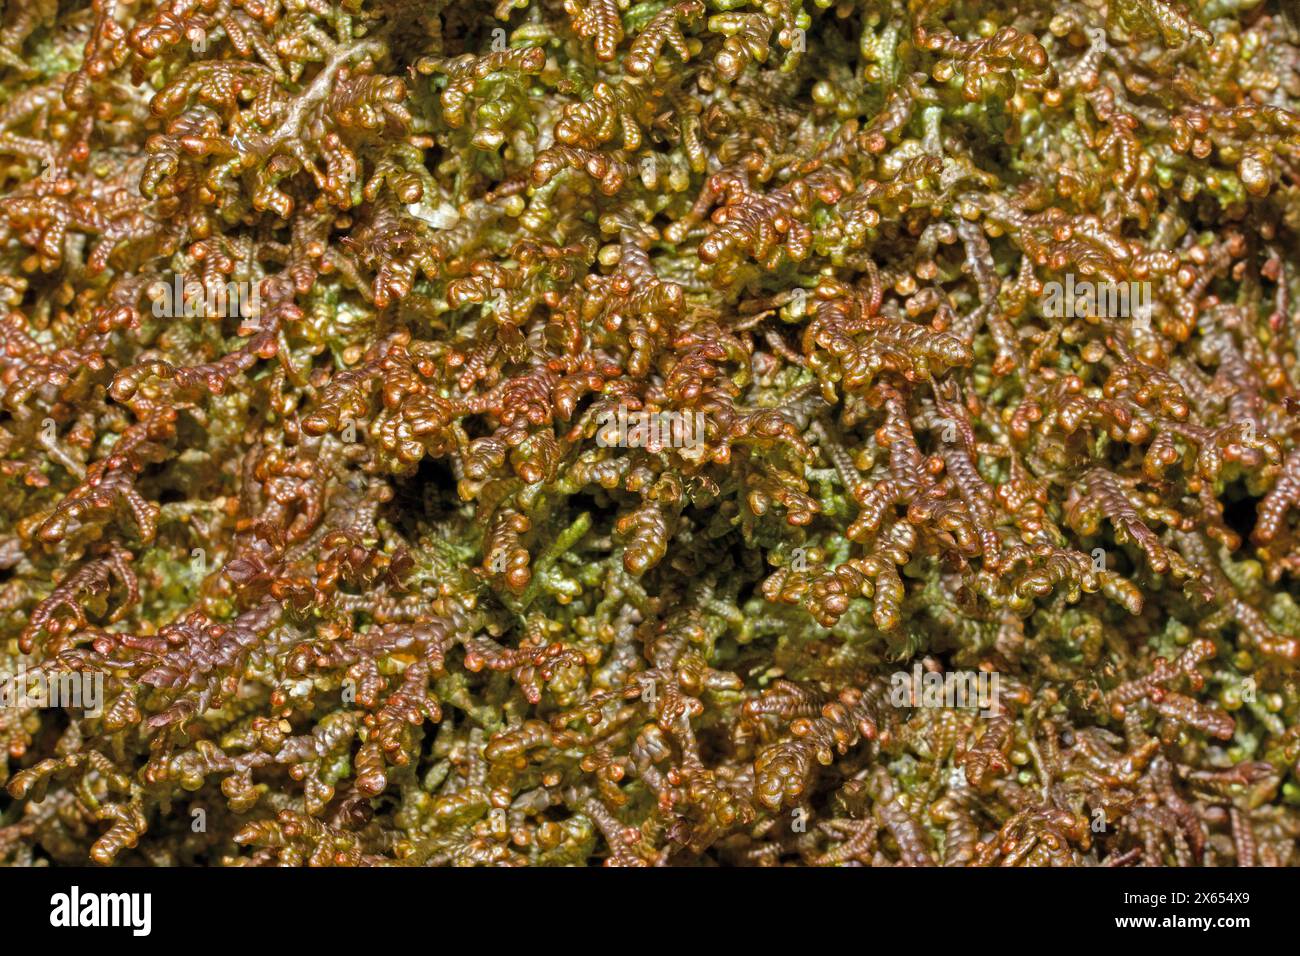 The liverwort Frullania tamarisci (Tamarisk Scalewort) is common on rocks and trees in western Britain. Here it was found in wet birch woodland. Stock Photo